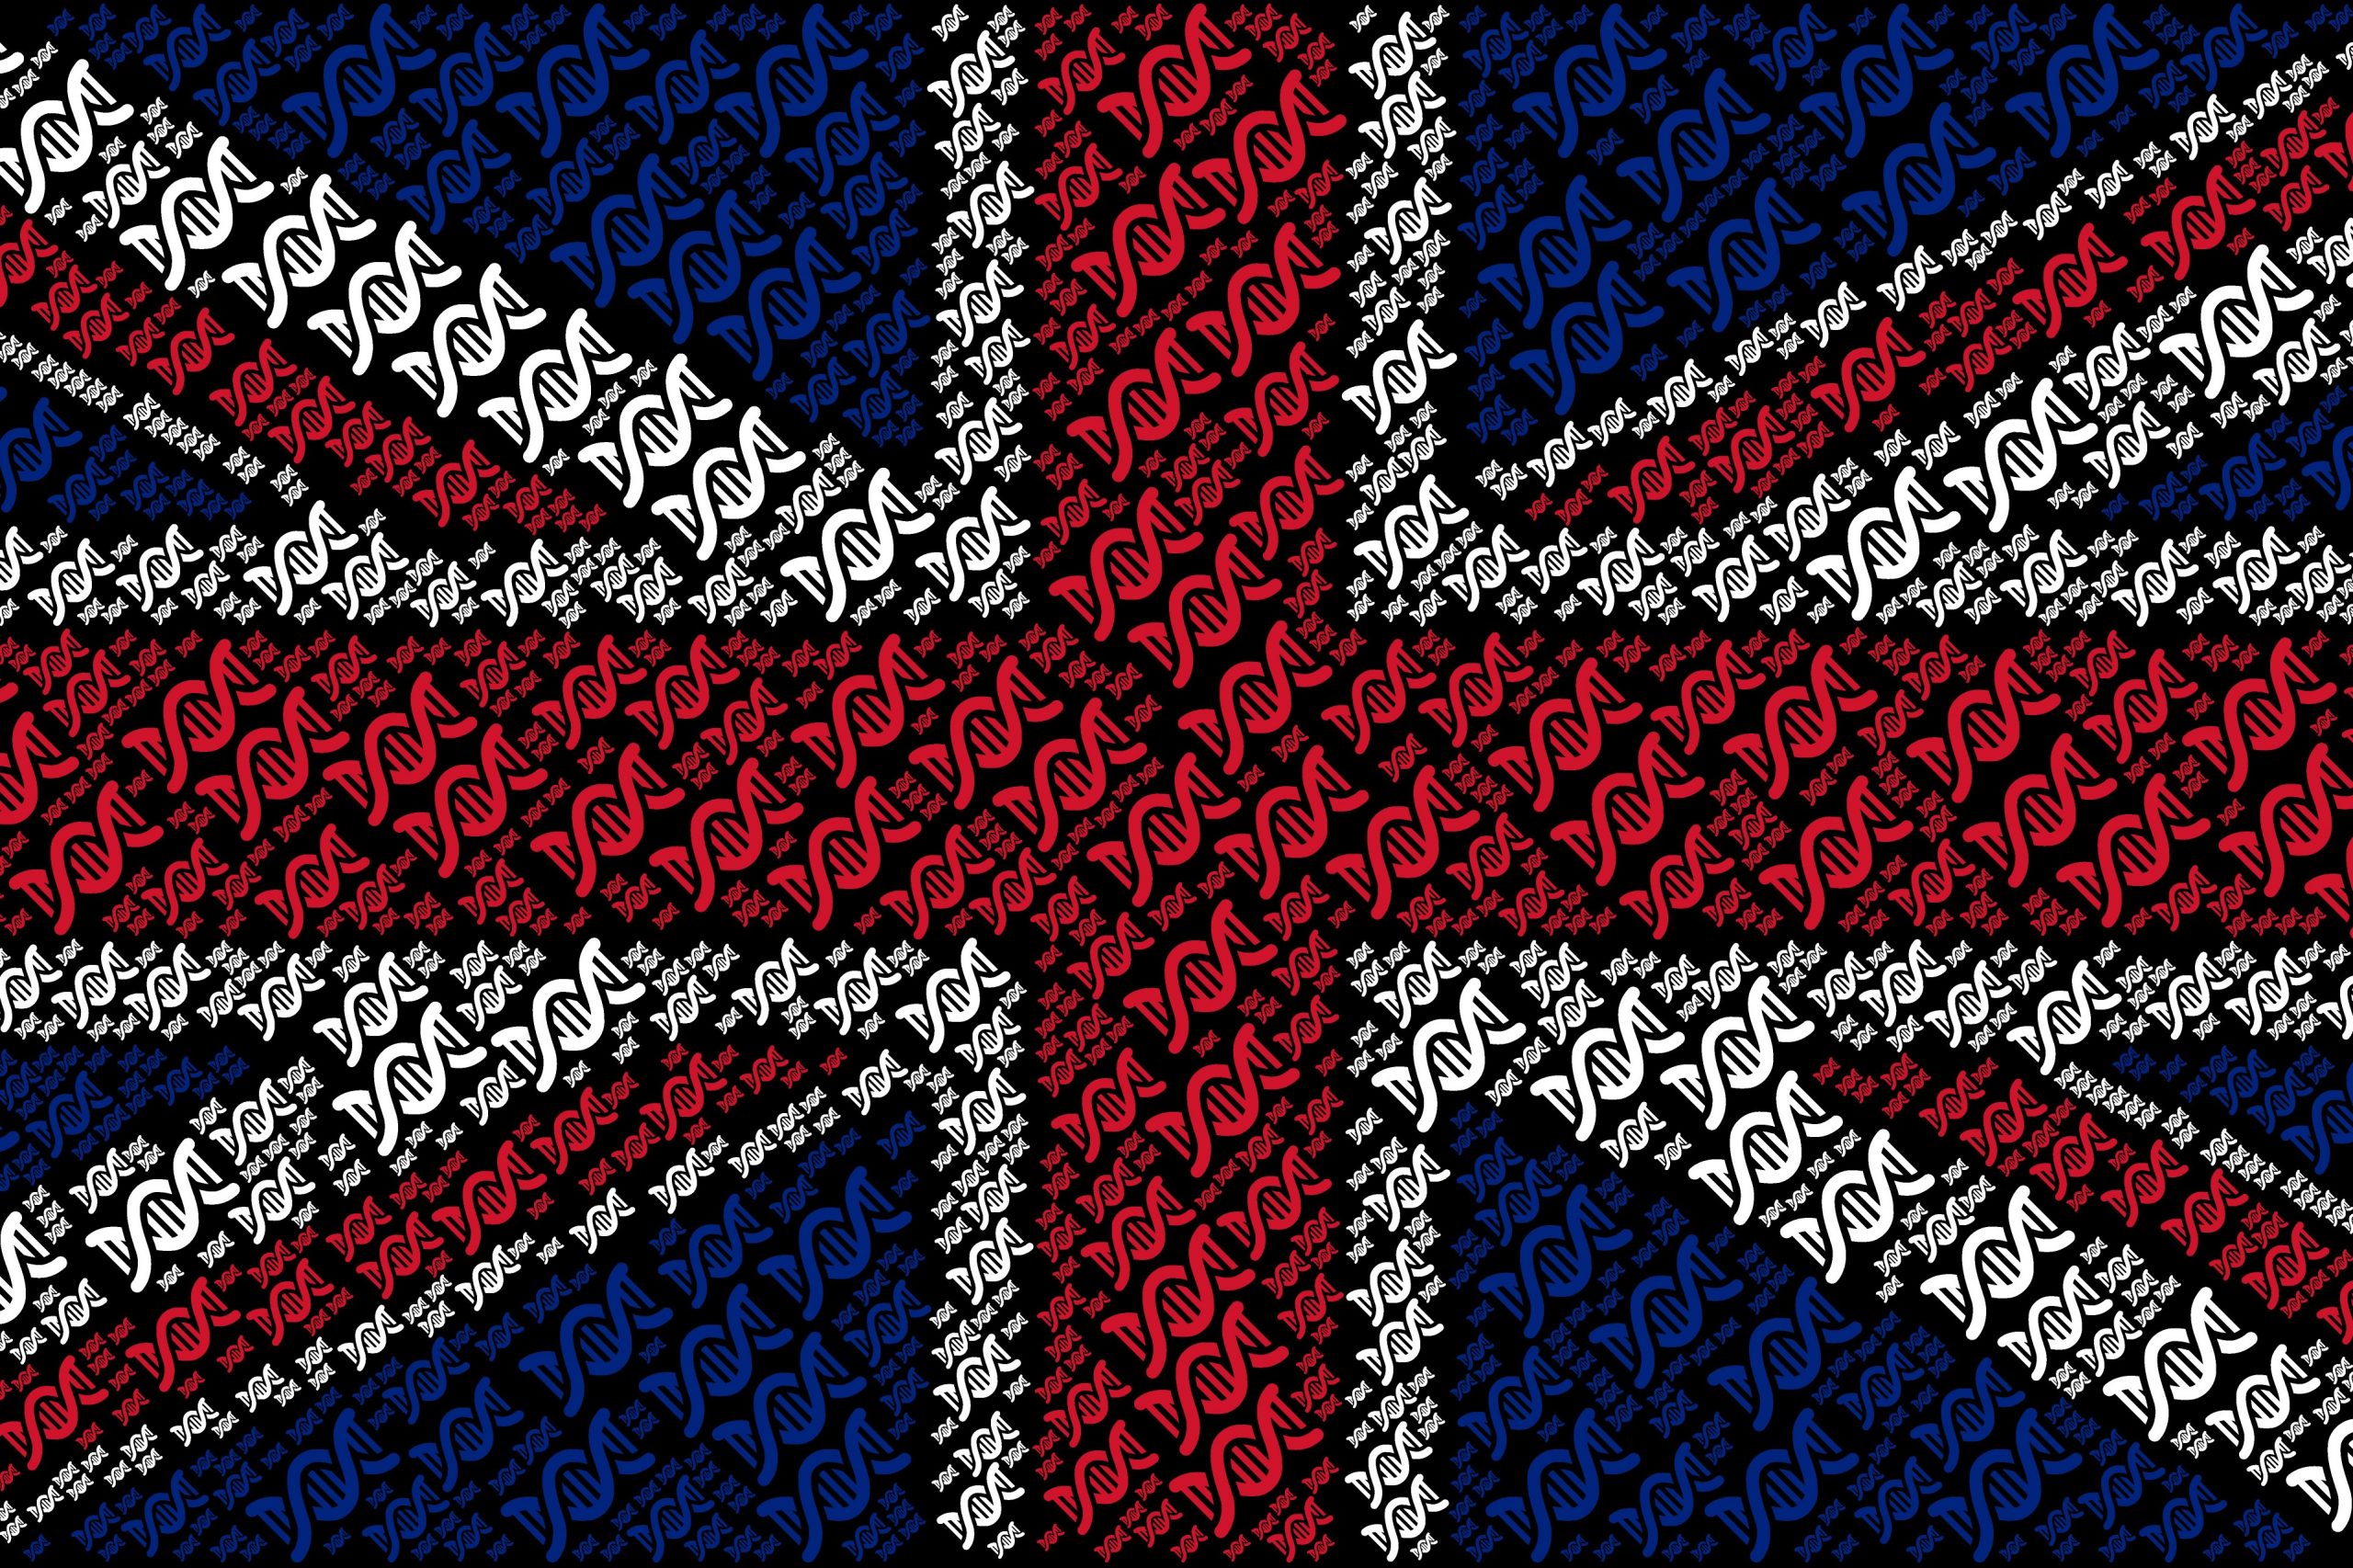 Union Jack flag made out of small DNA strands